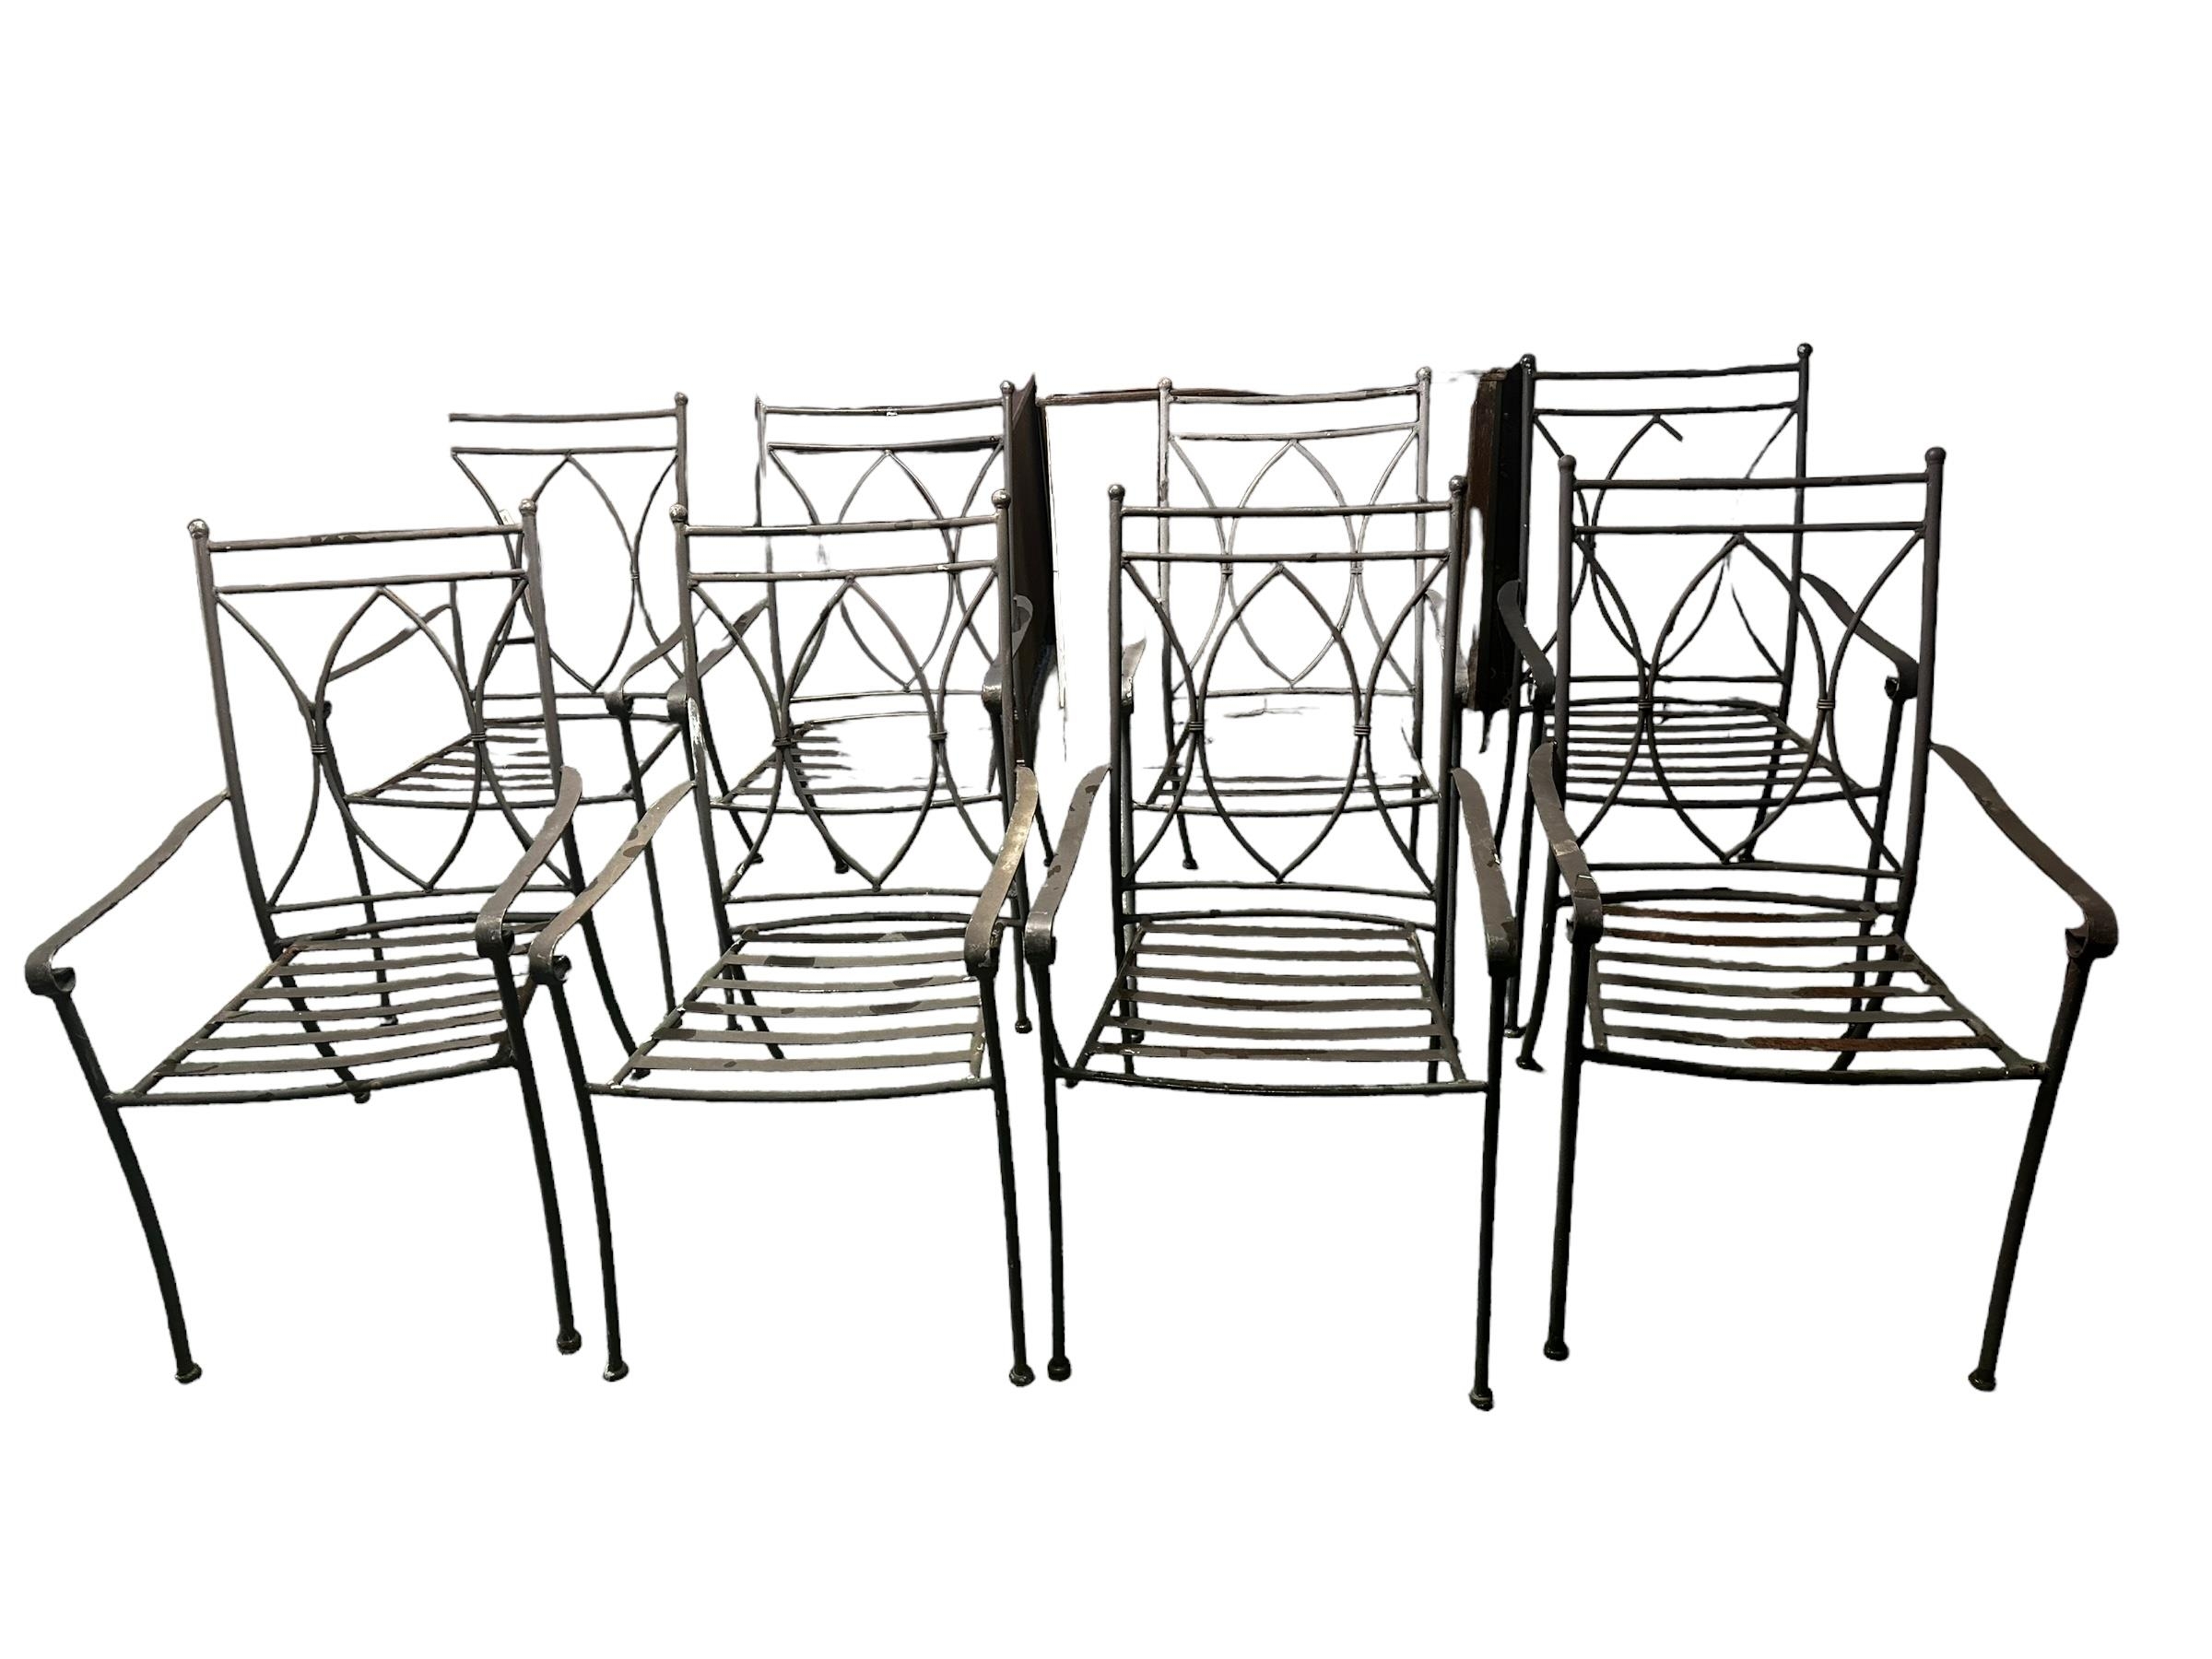 8 Neptune style iron garden arm chairs, (one with some rust). All with some general wear.